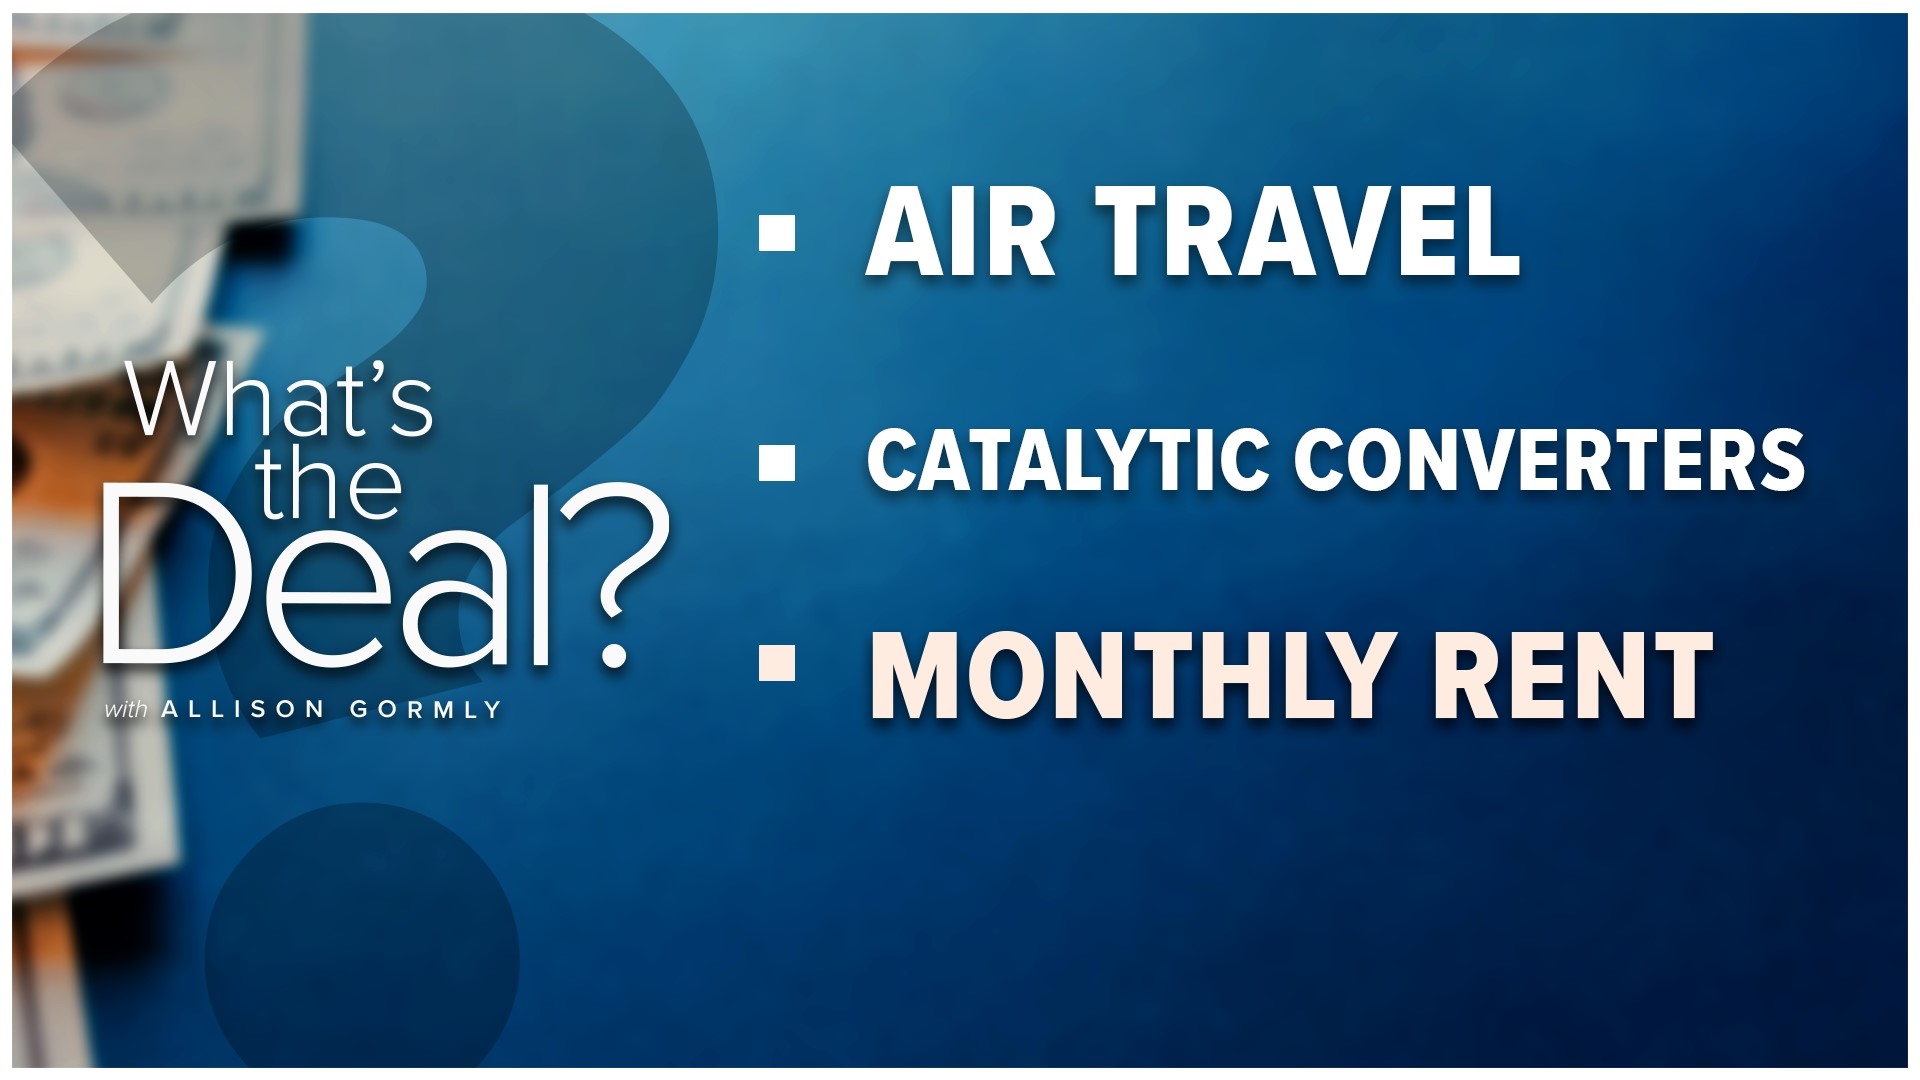 Explaining what's the deal with airline travel costs this summer, how people are protecting their catalytic converters and how to benefit from paying monthly rent.